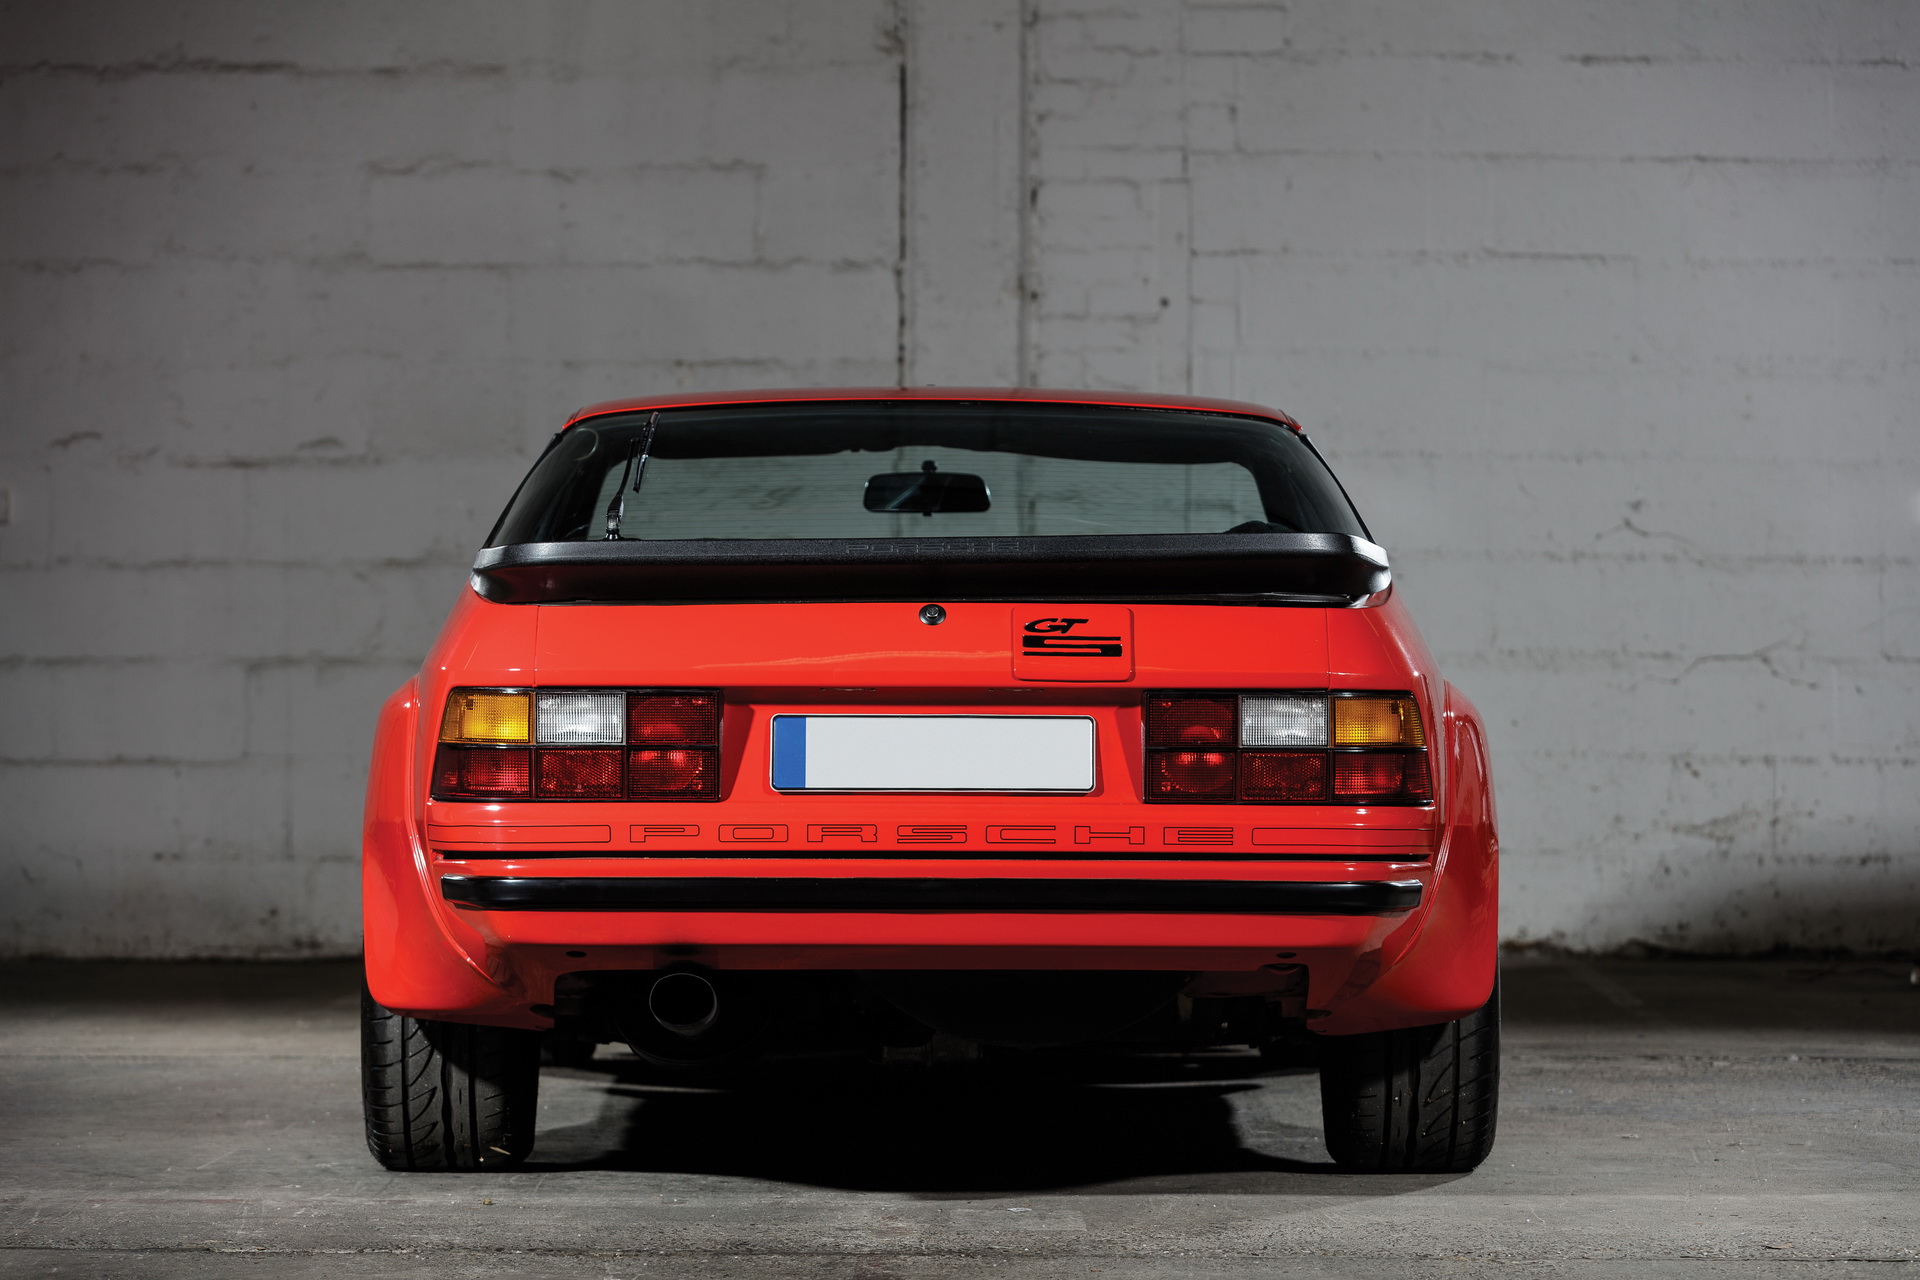 1982 Porsche 924 Carrera GTS Is An Automotive Unicorn That Comes With ...